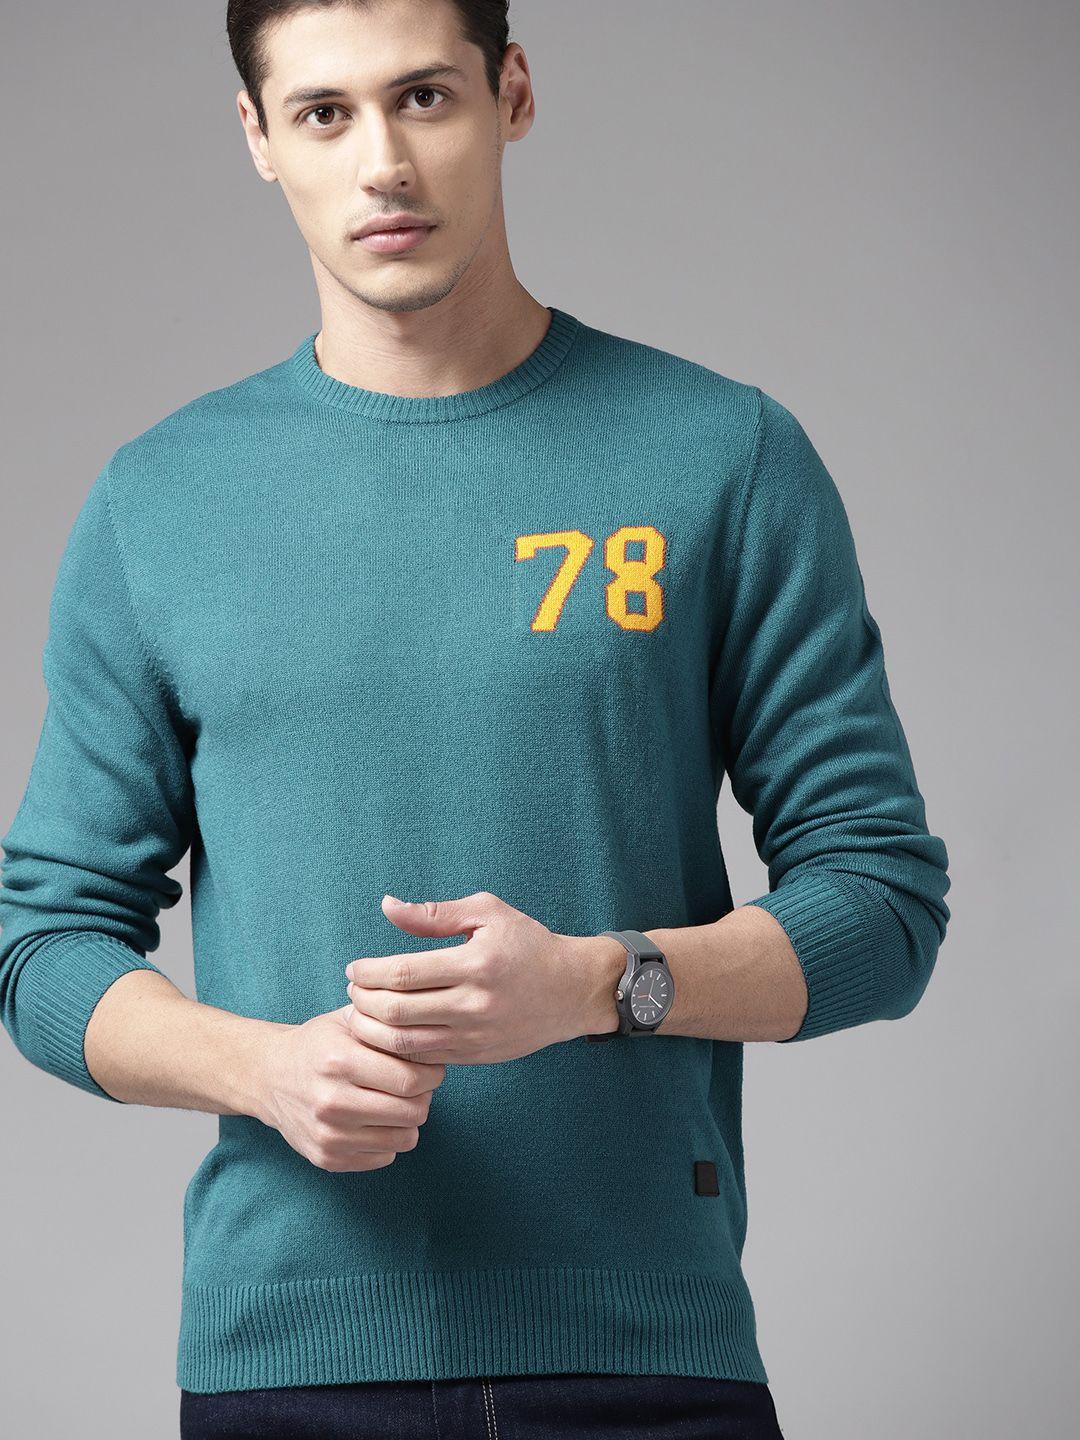 the roadster lifestyle co men teal blue typography pullover